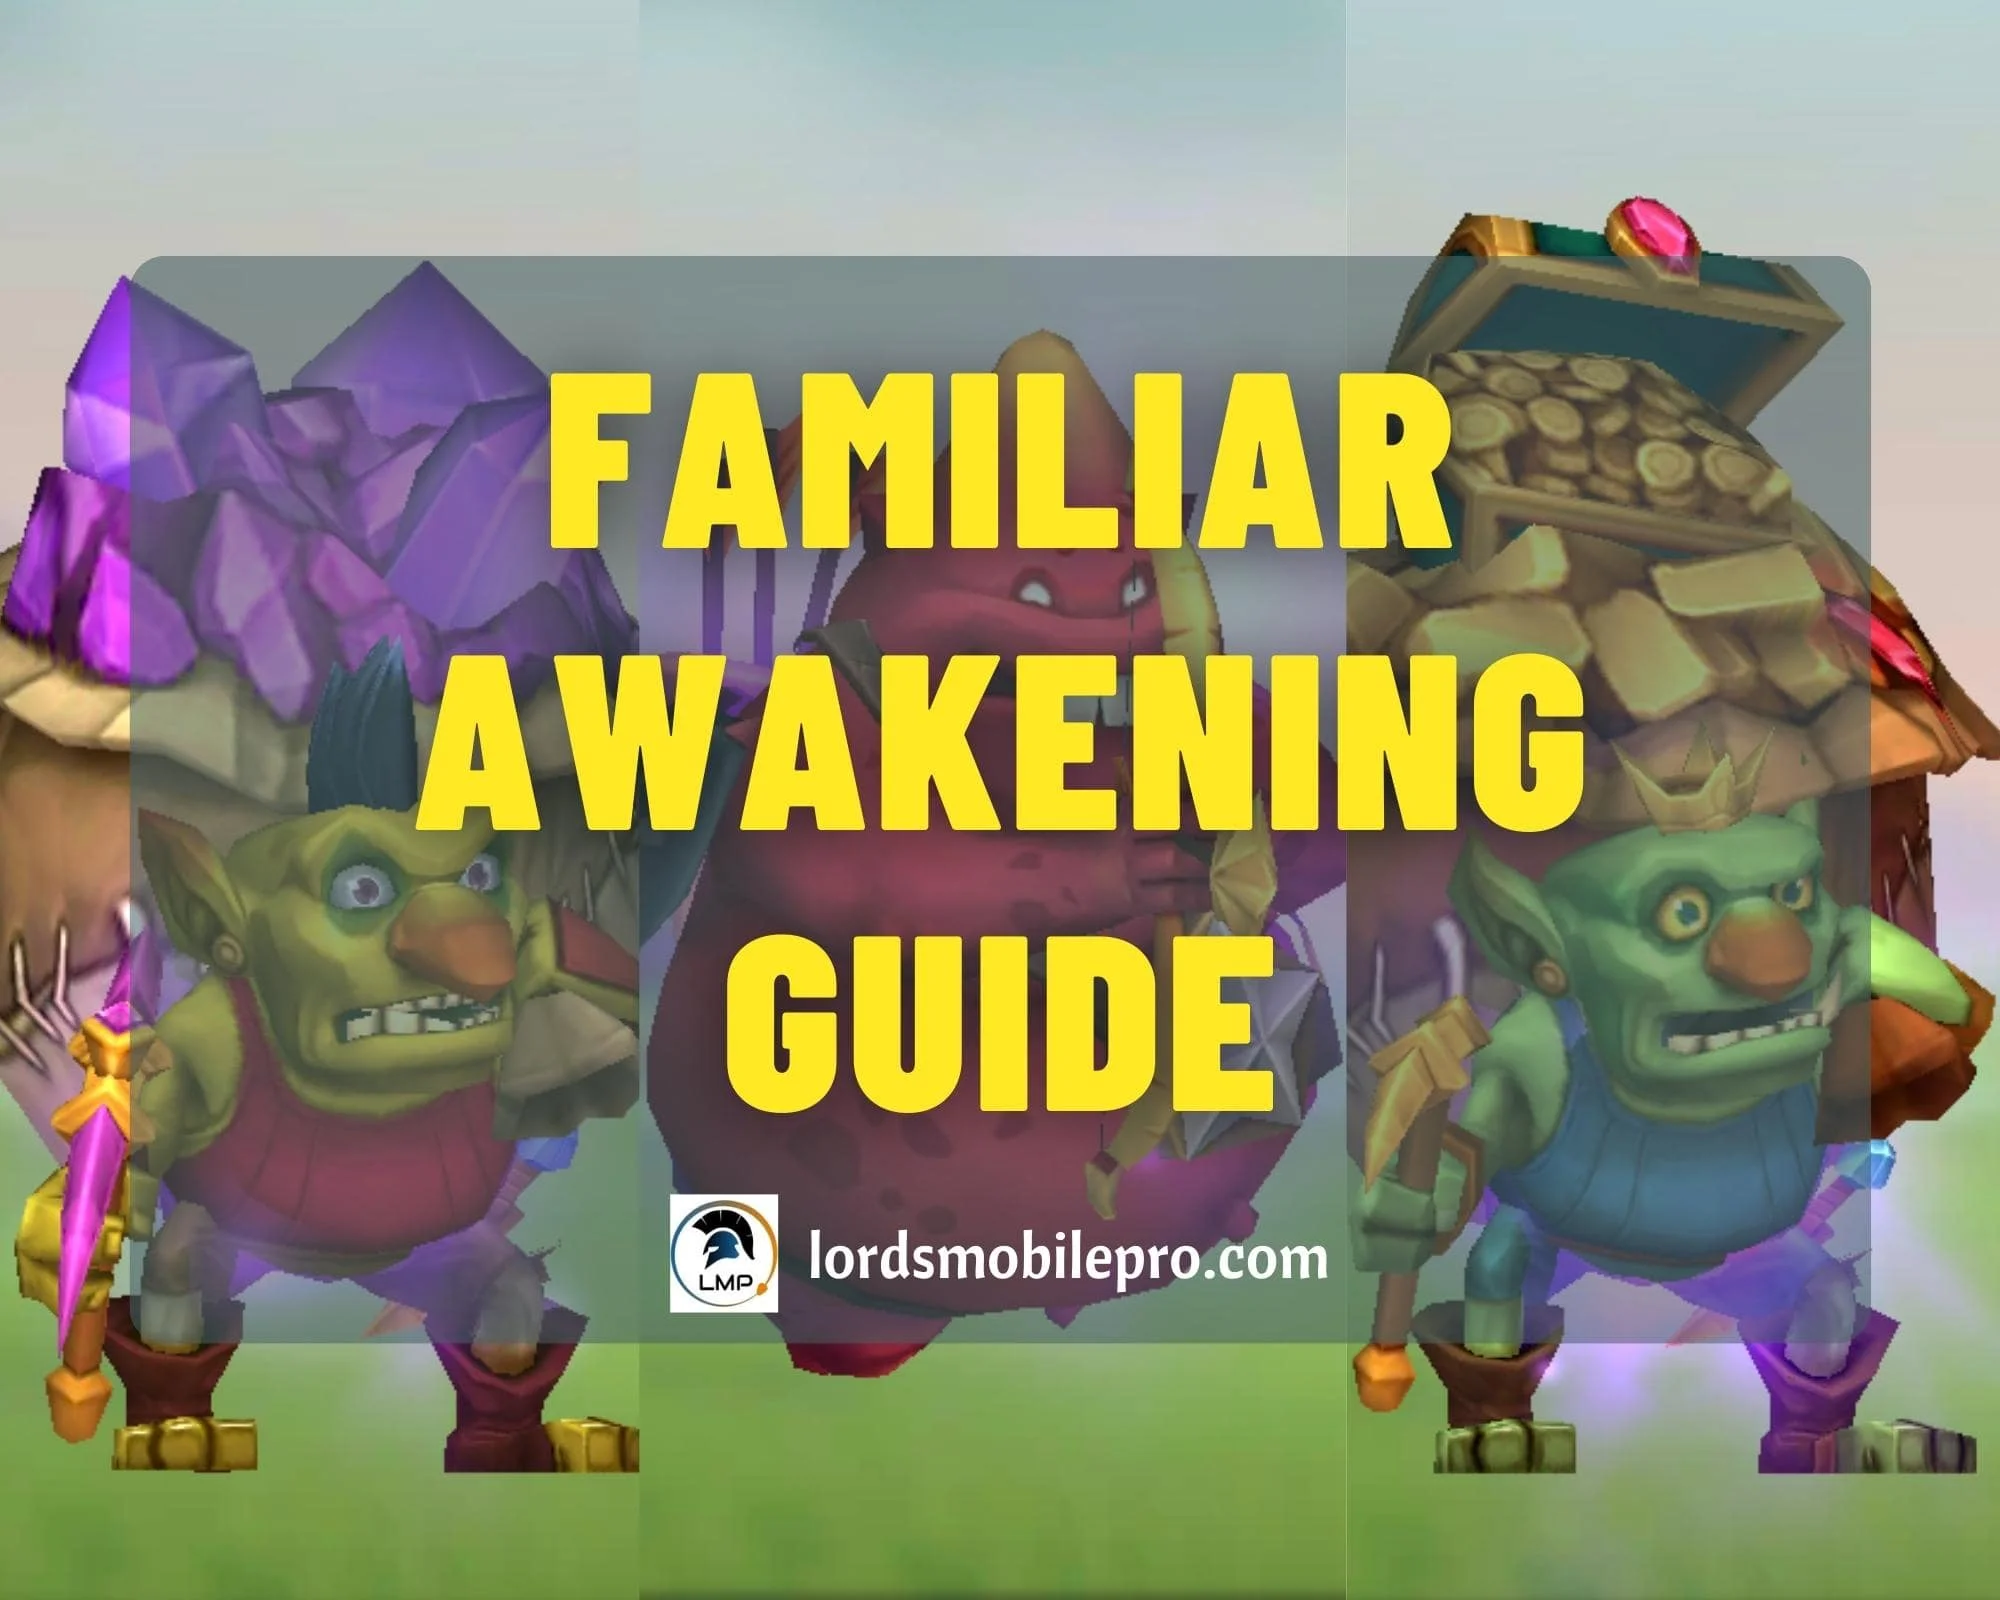 Beast Familiar For All: Beginning Awakening Of Mythical Talents